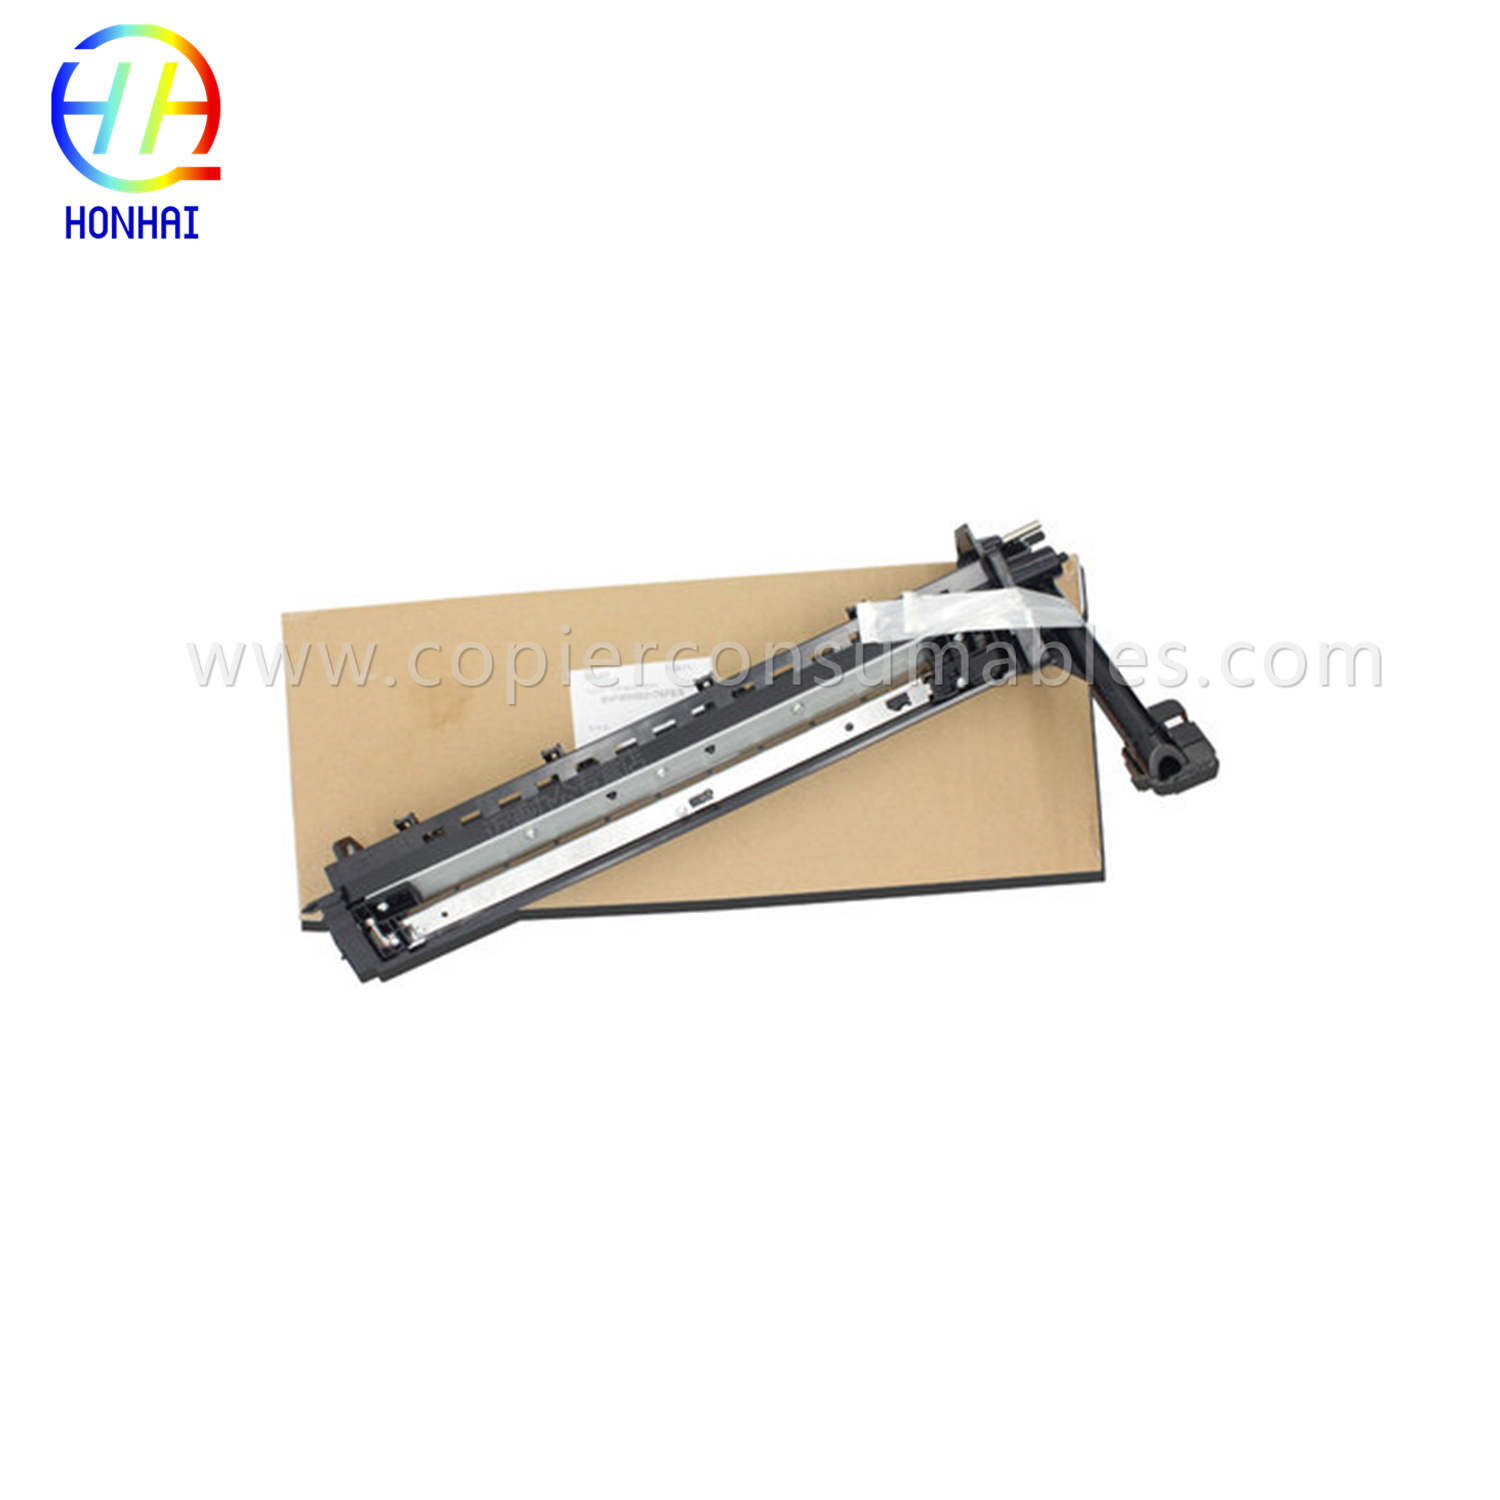 Trommelramme for Sharp Ar-5320 5320d Arm-160 162 205 207 (Sharp CFRM-0021RS5T CFRM-0021RS6D Toshiba 6LS11678000) OEM